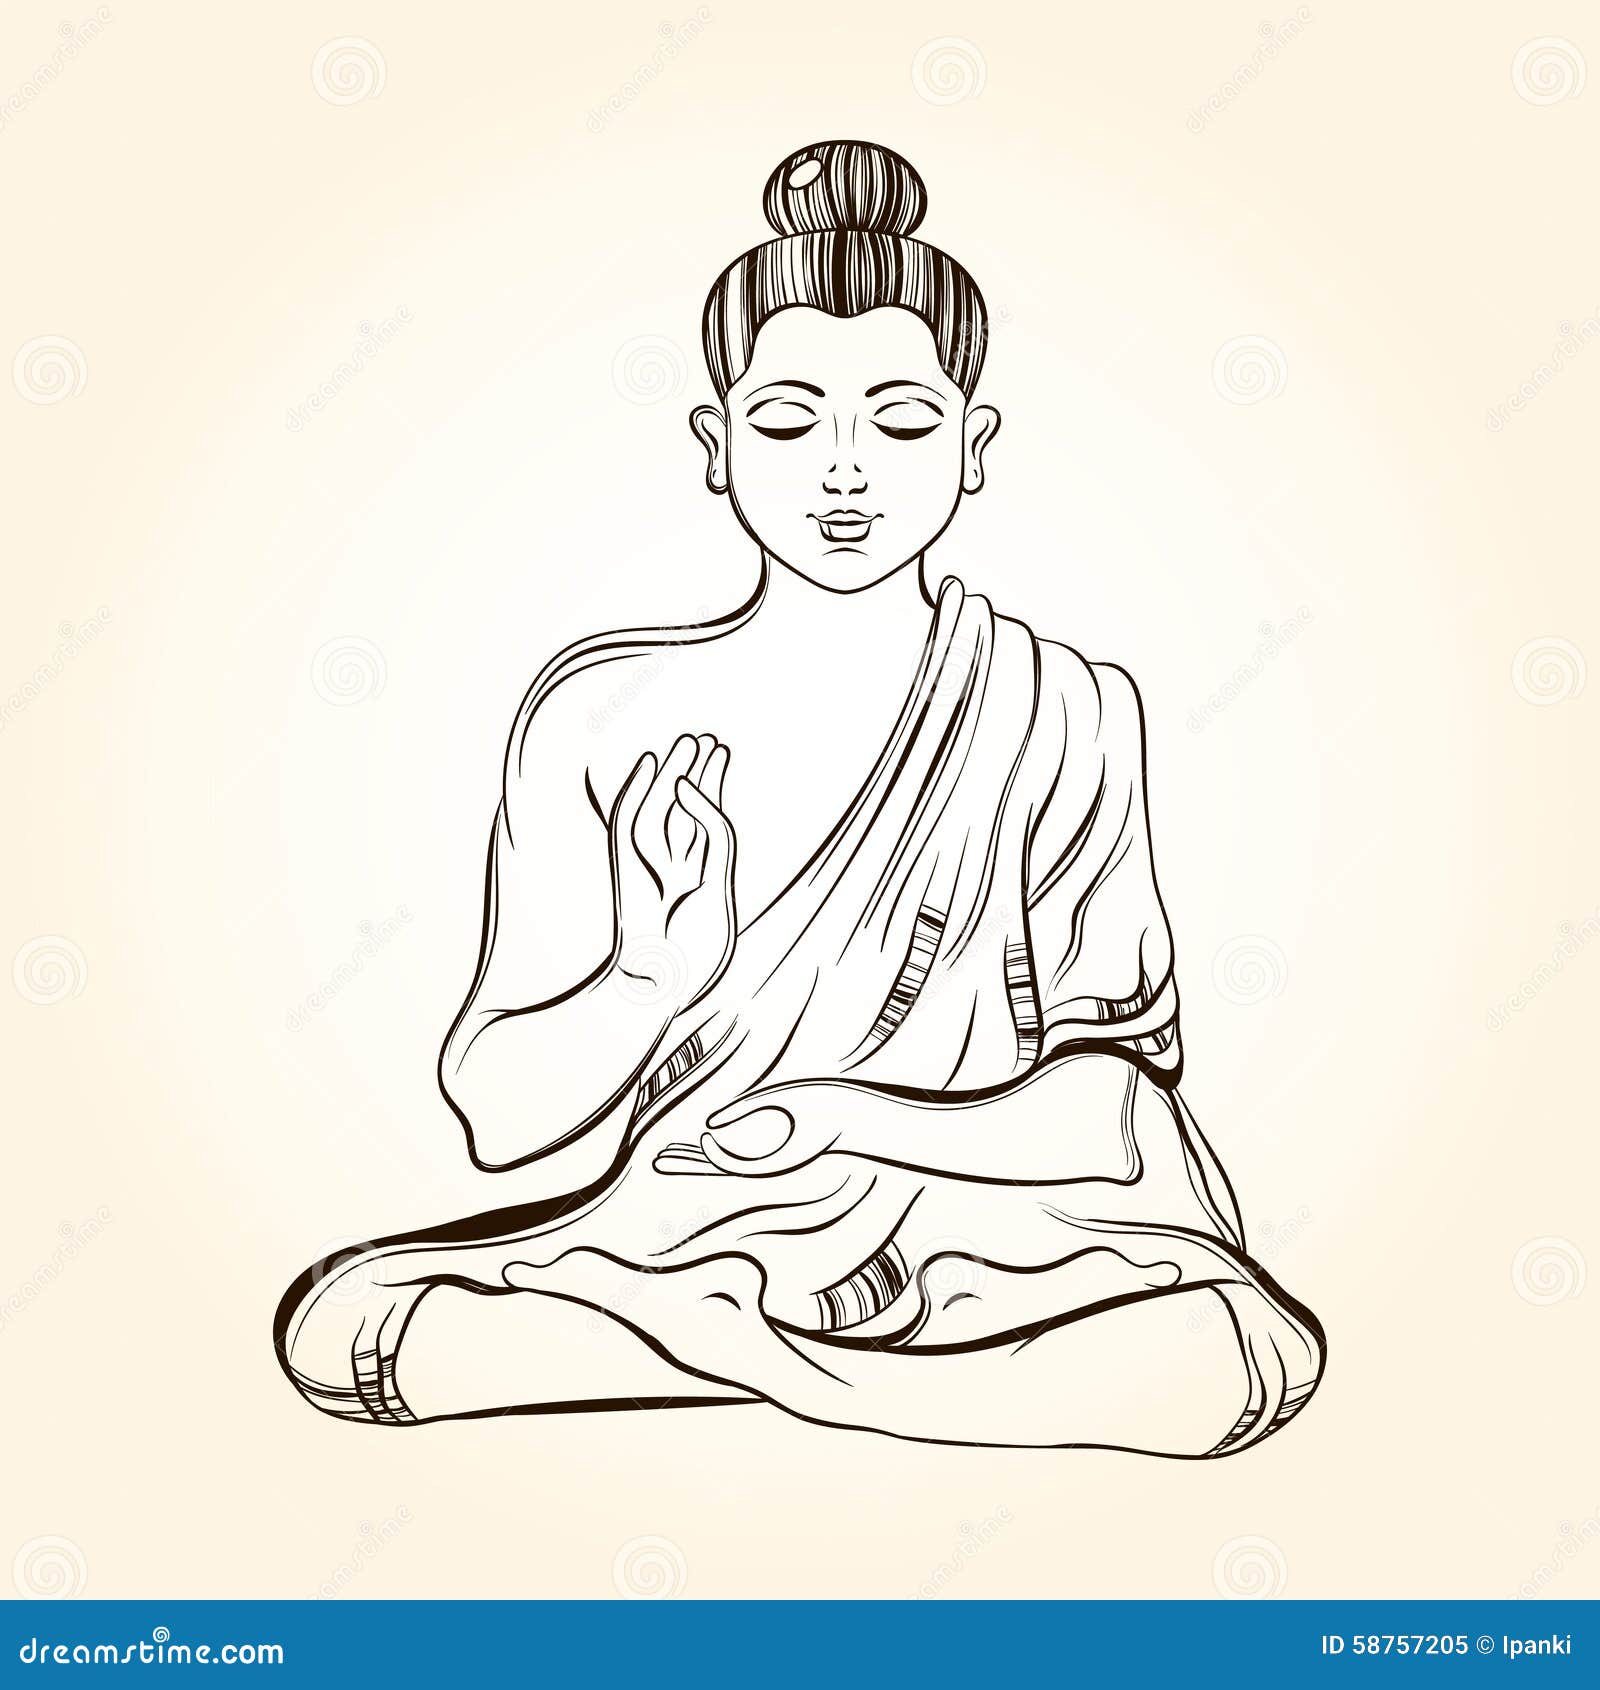 Meditation Drawing by One Line - Pixels